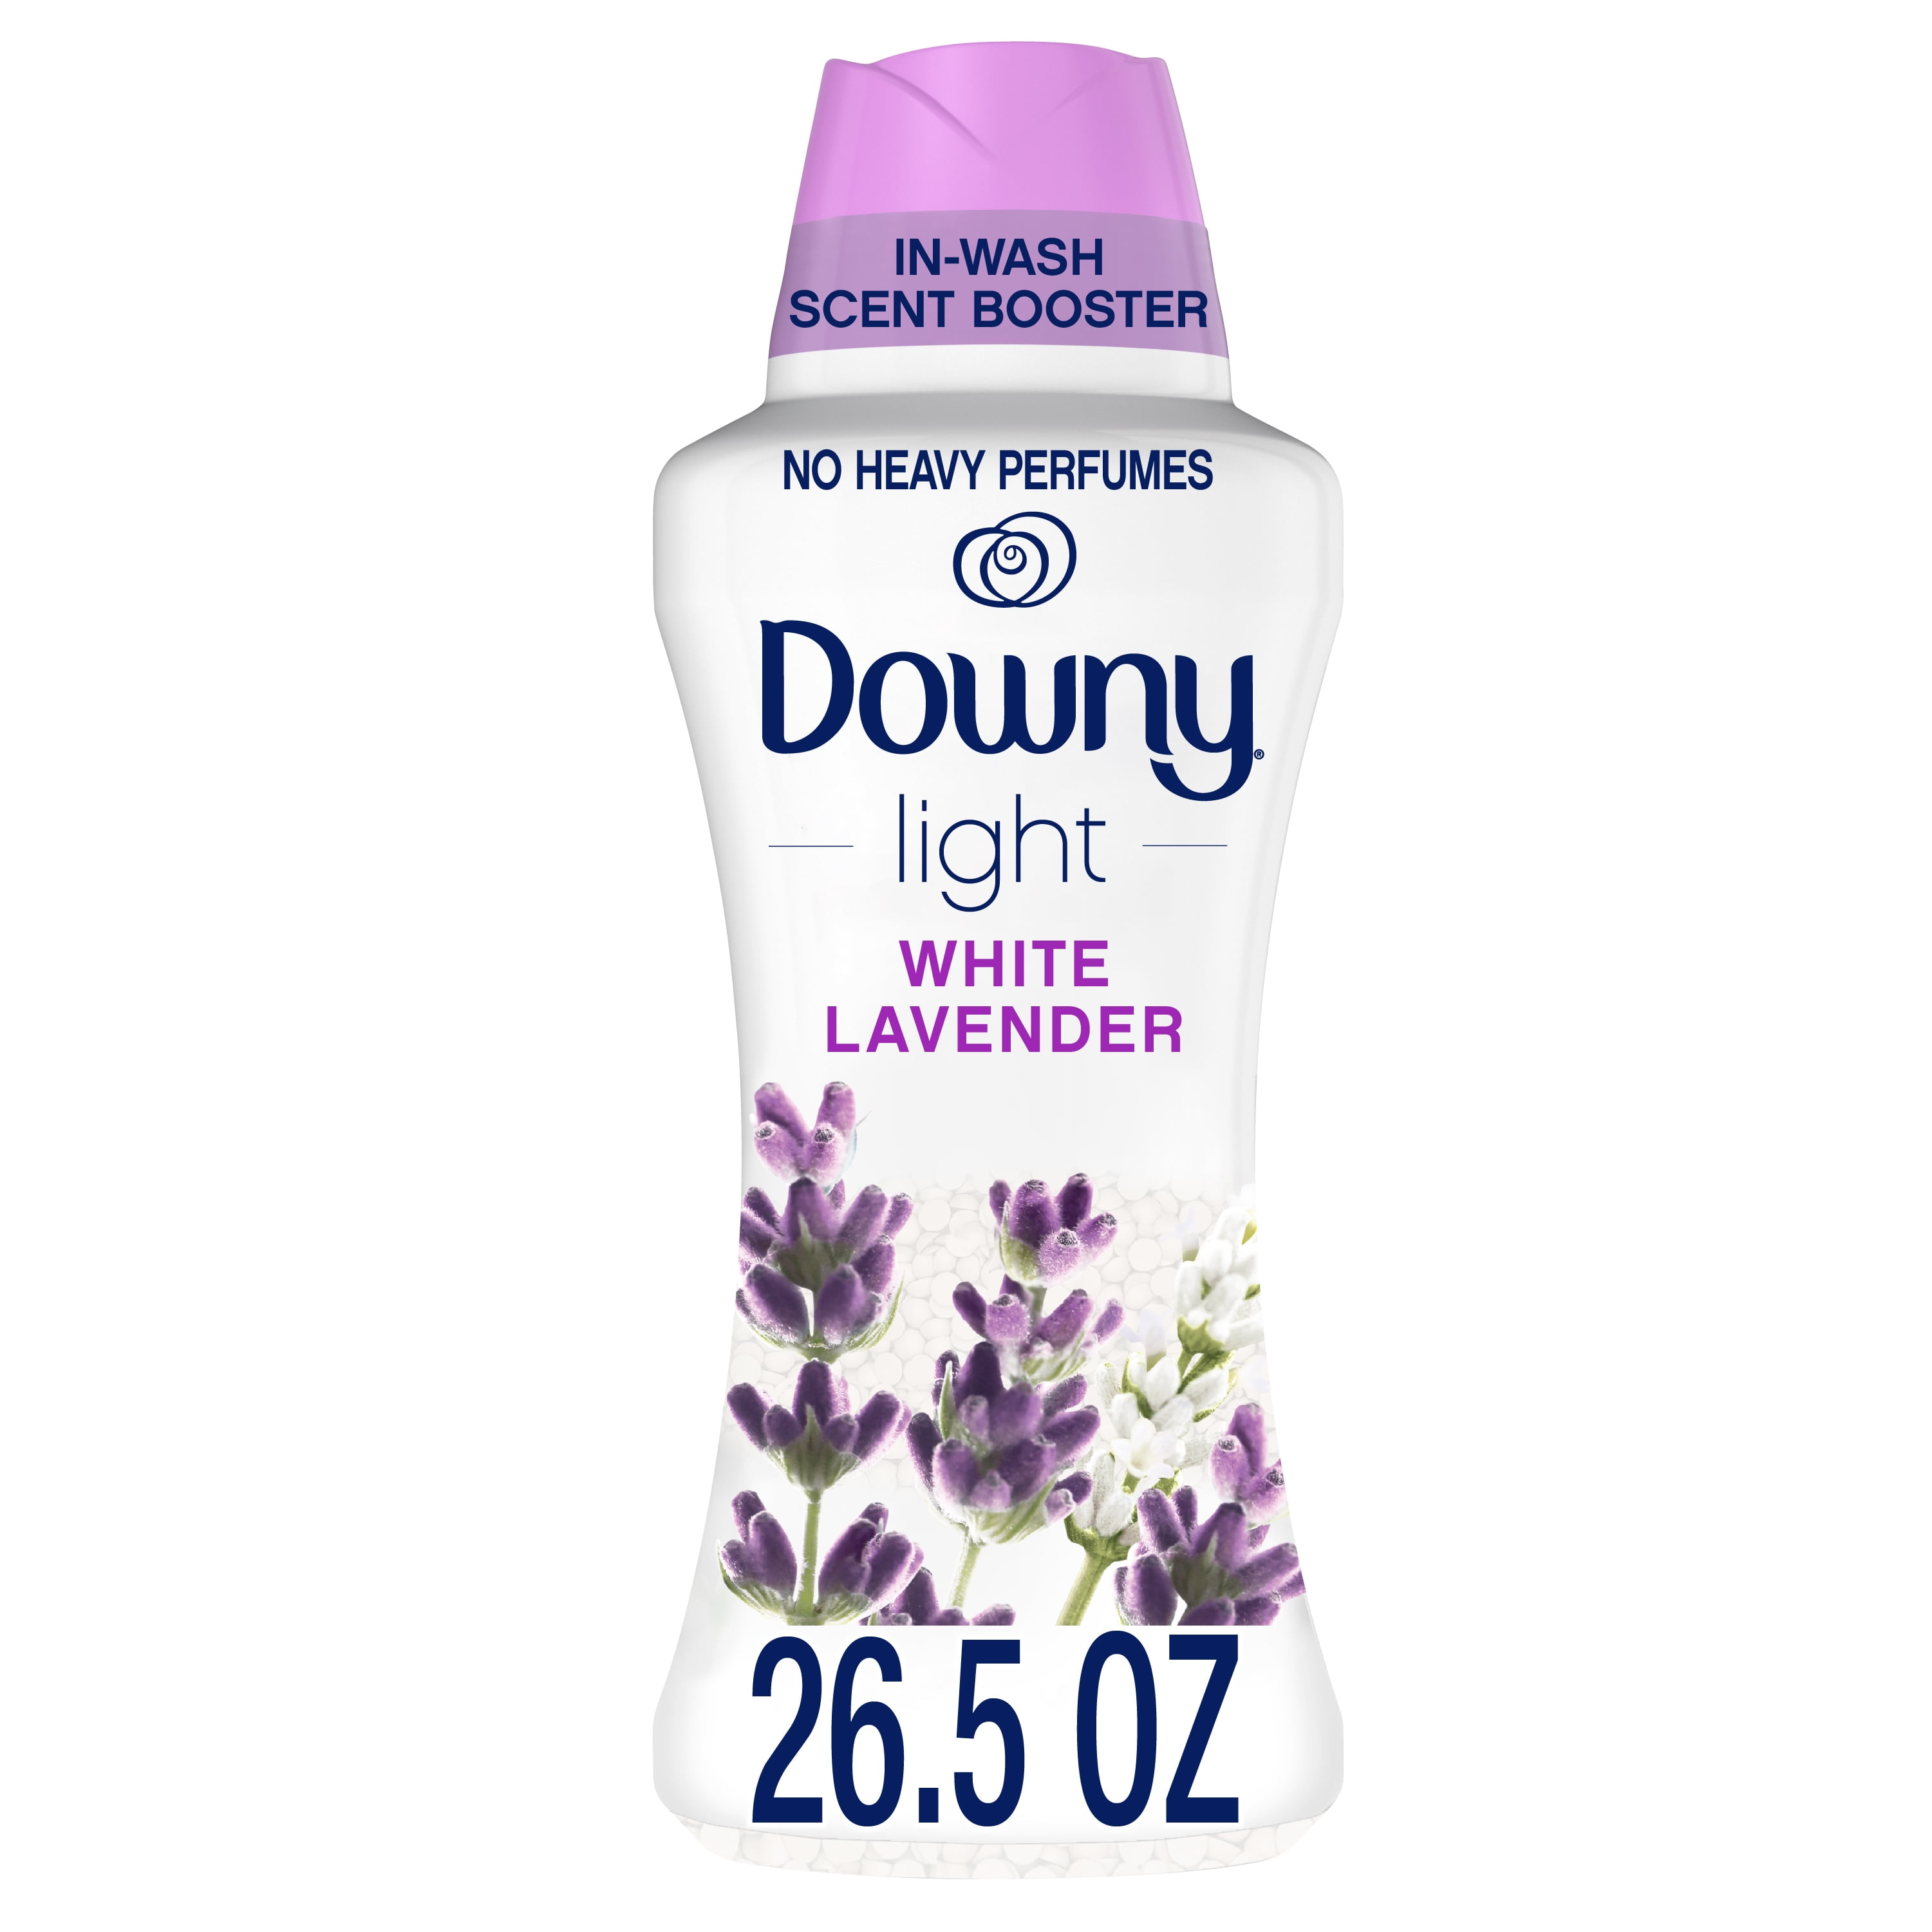 Downy Light Laundry Scent Booster Beads for Washer, White Lavender, 26.5 oz, with No Heavy Perfumes